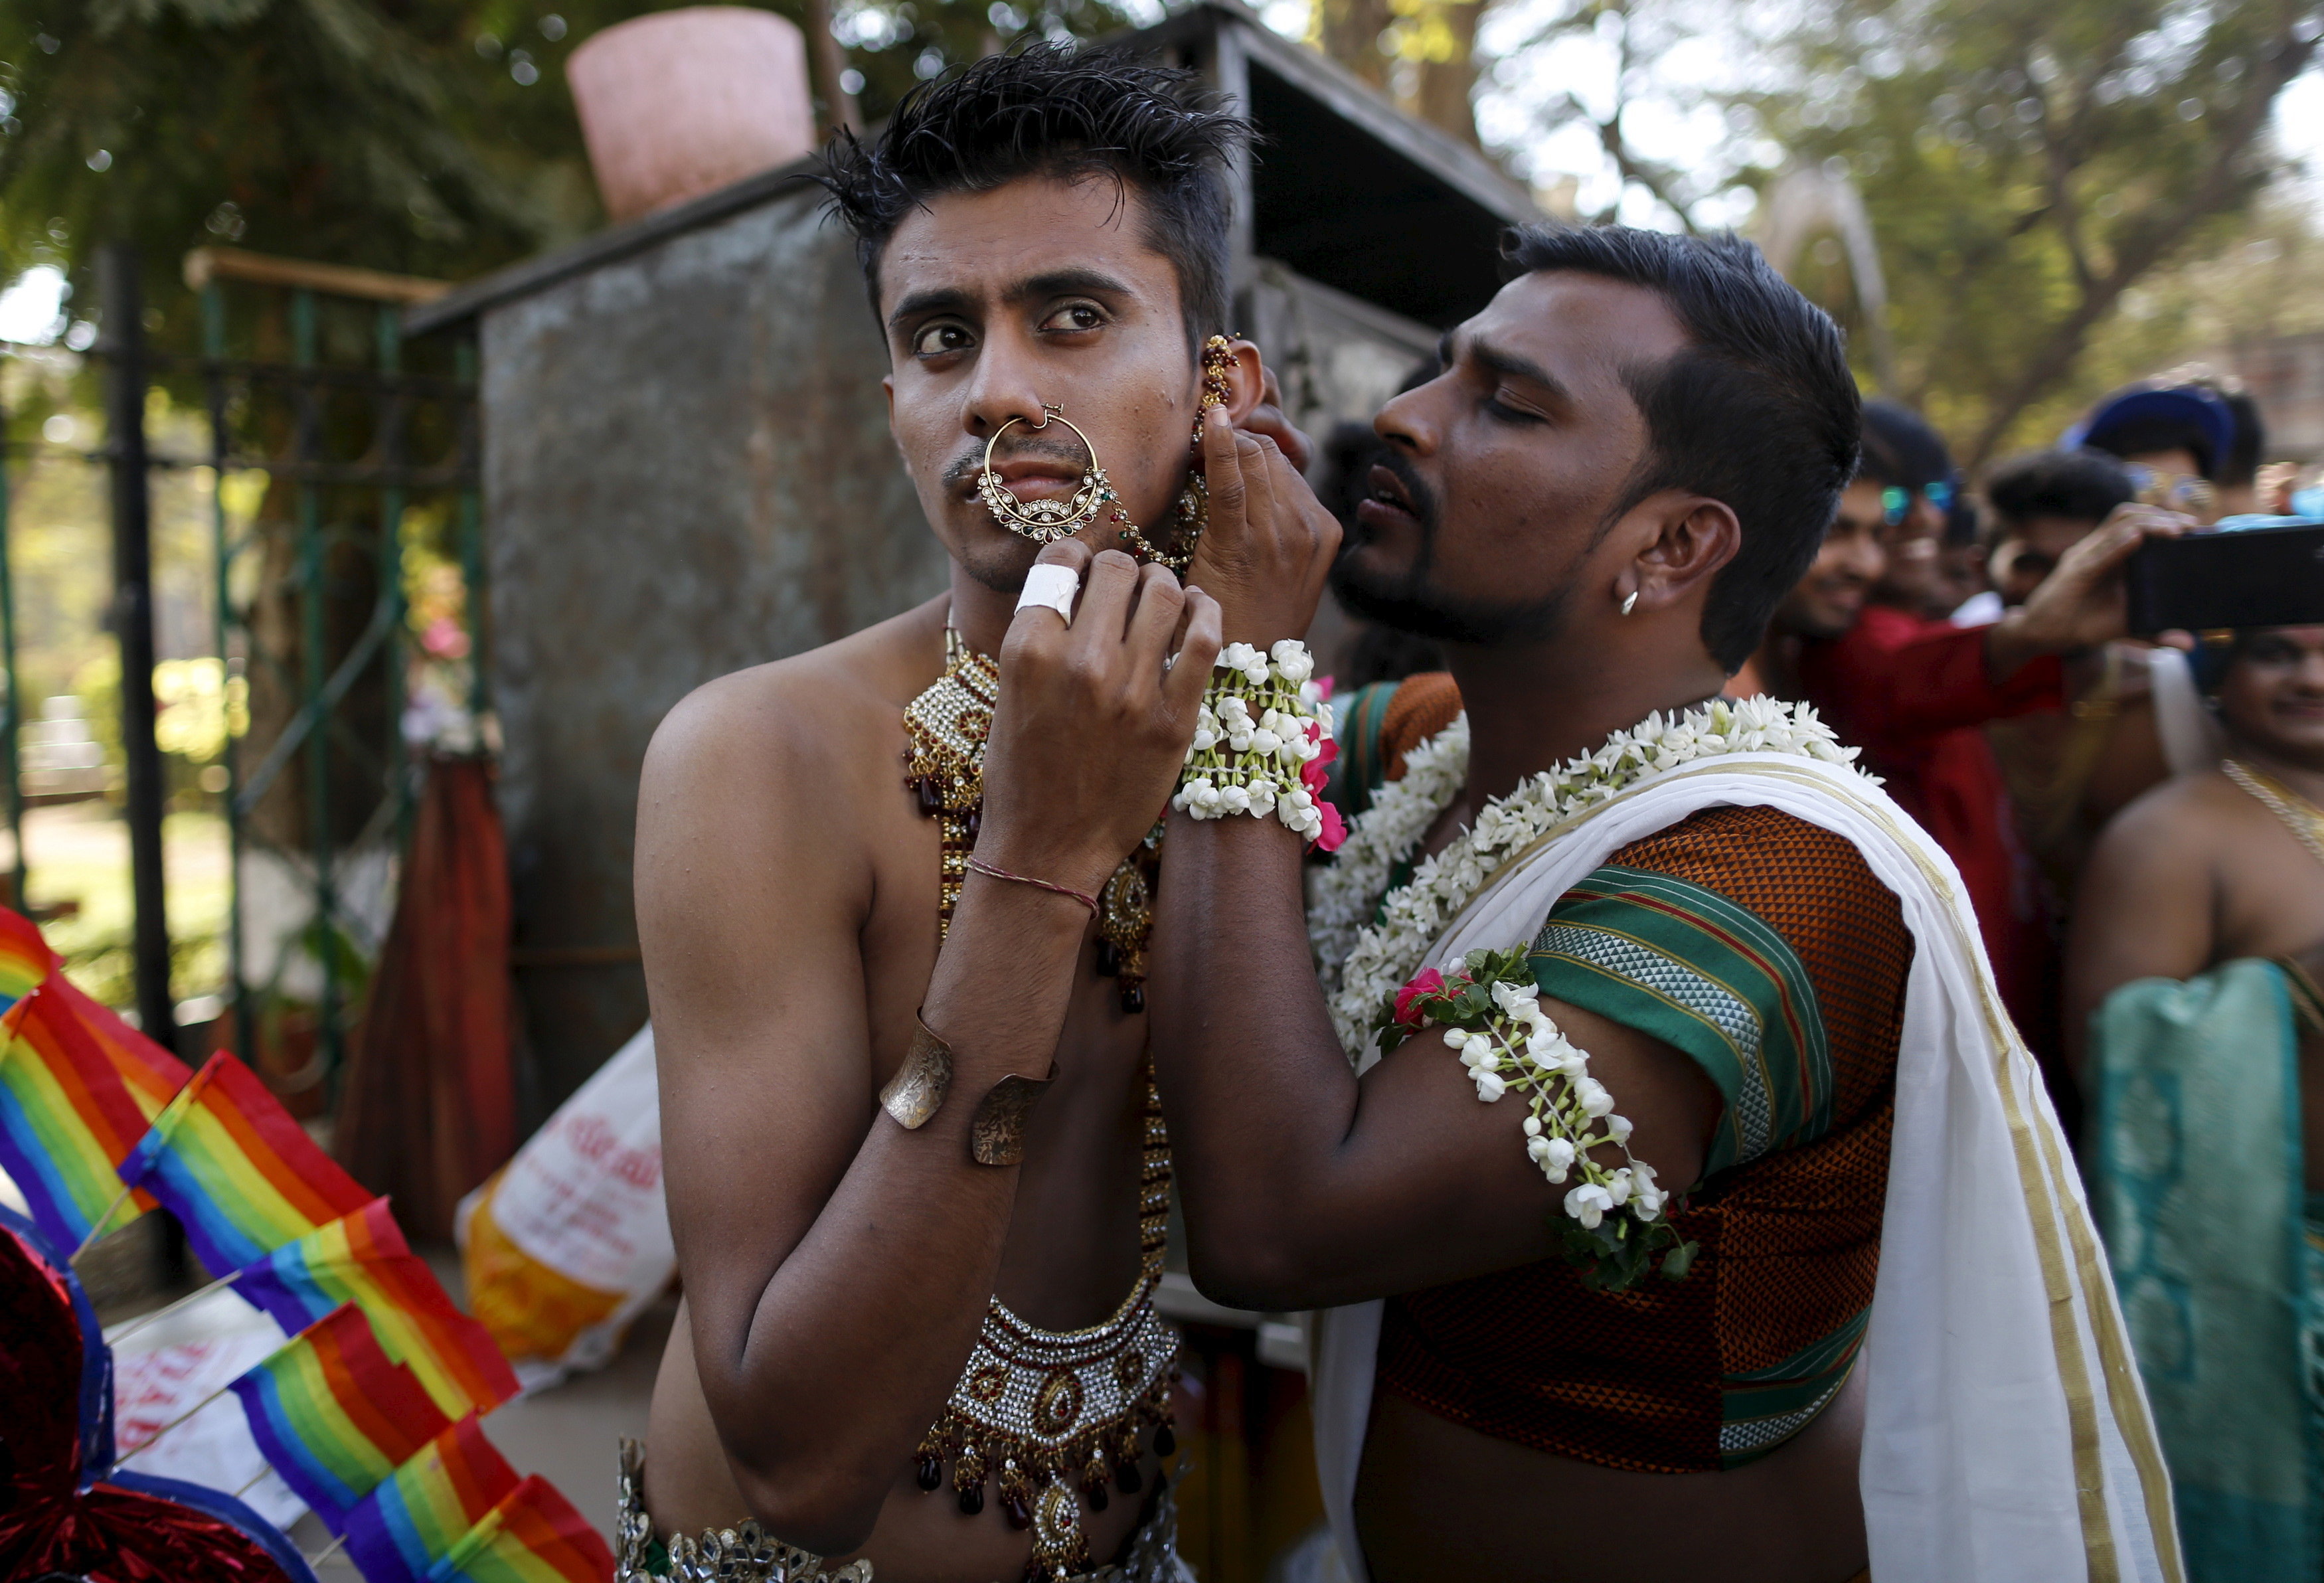 Sep 2018. Indias Supreme Court on Thursday struck down a ban on gay sex after a decades-old campaign against a colonial-era law used to hold back.